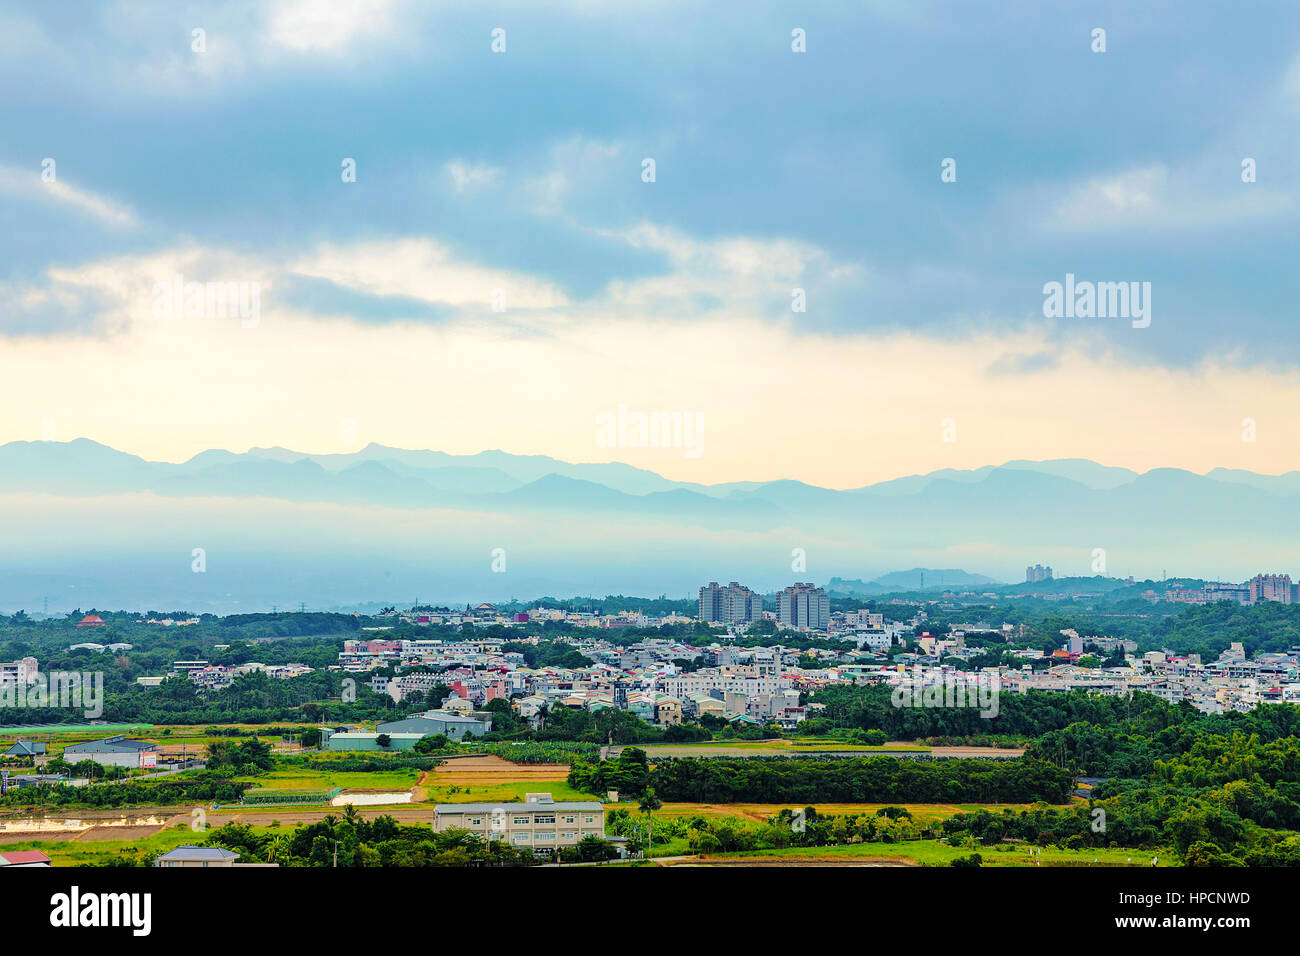 Chiayi Taiwan at dawn with mountain silhouette in the background Stock Photo